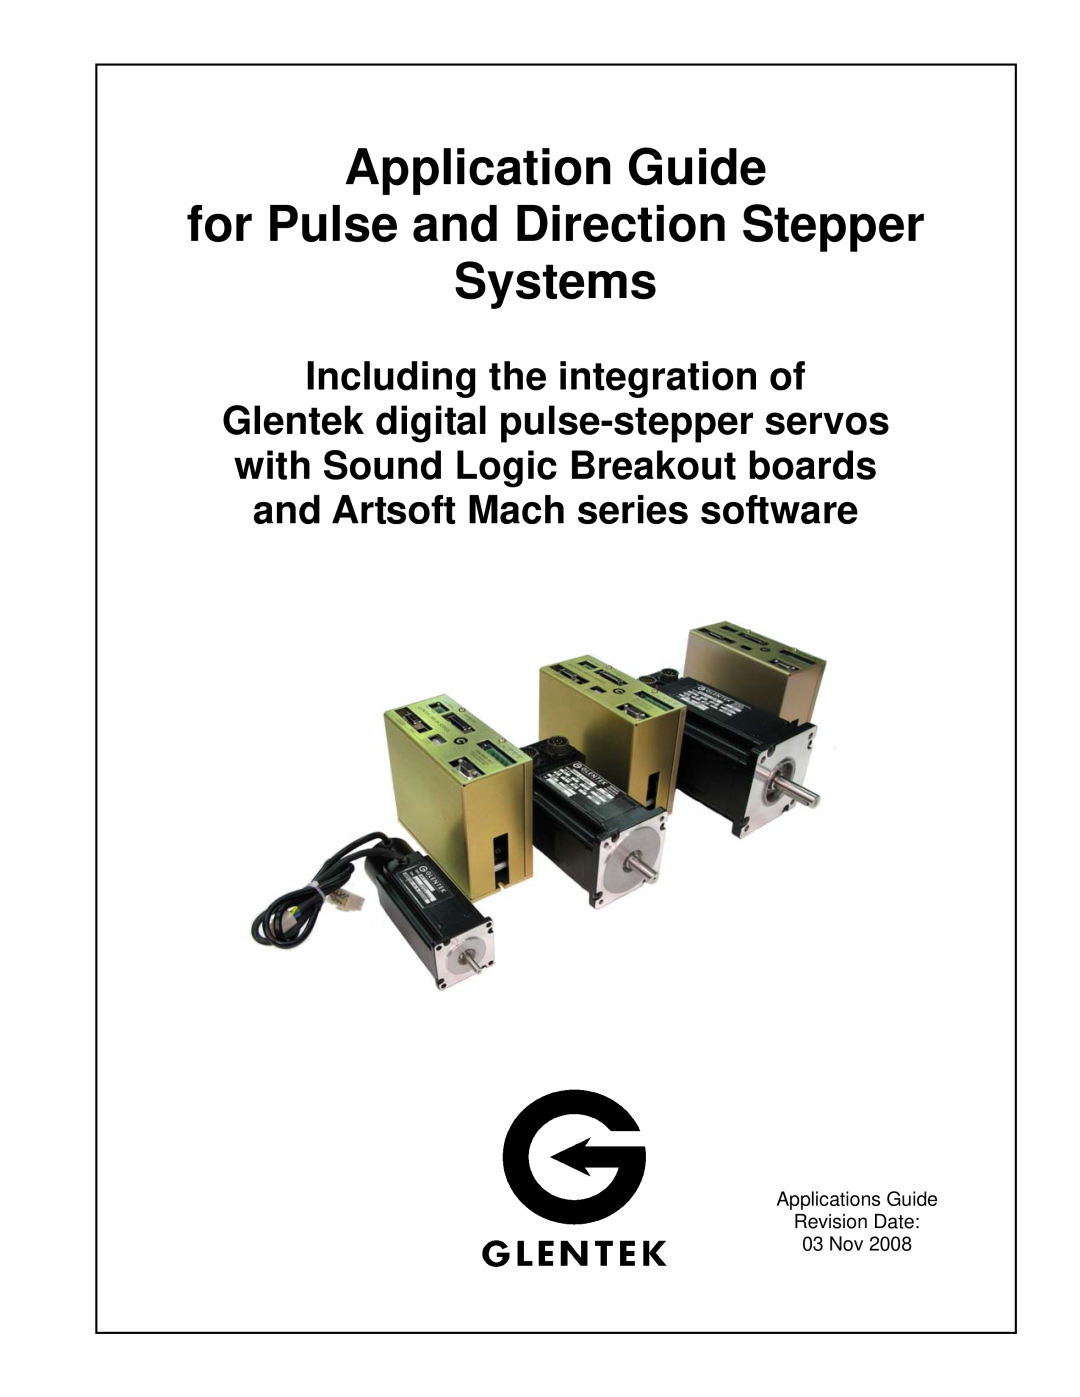 SMC Networks Amplifier manual Including the integration of, Application Guide for Pulse and Direction Stepper, Systems 